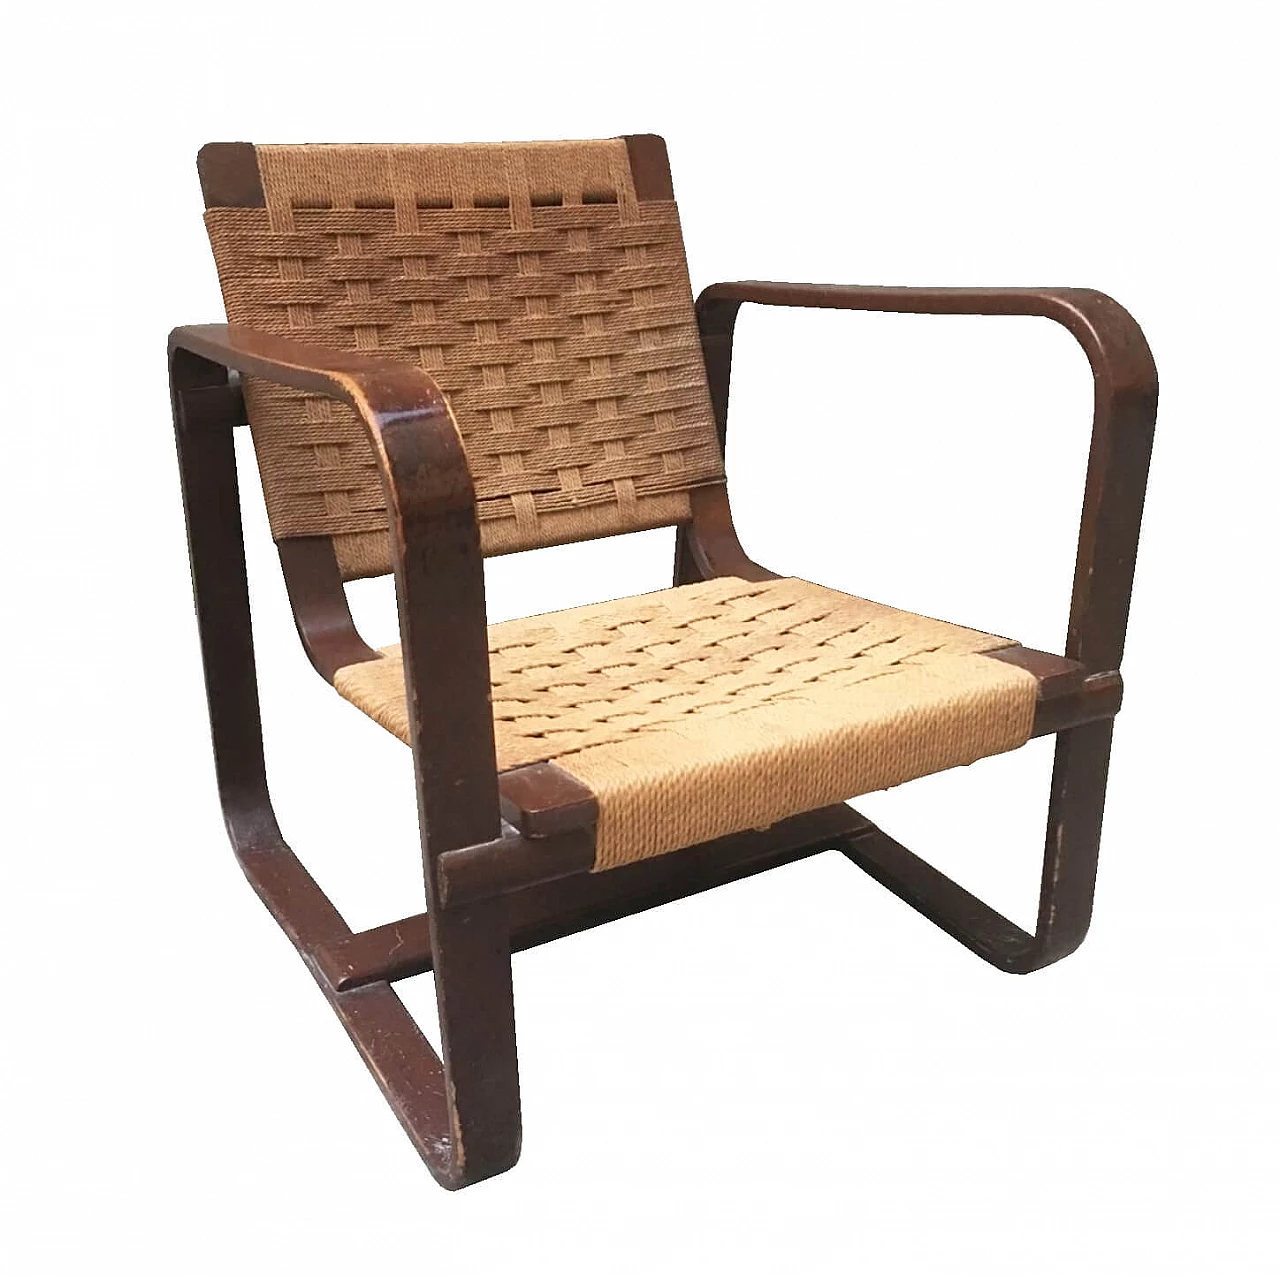 Bocconi armchair, in wood and wicker, by Giuseppe Pagano Pogatschnig & Gino Maggioni, 1940s 1076485